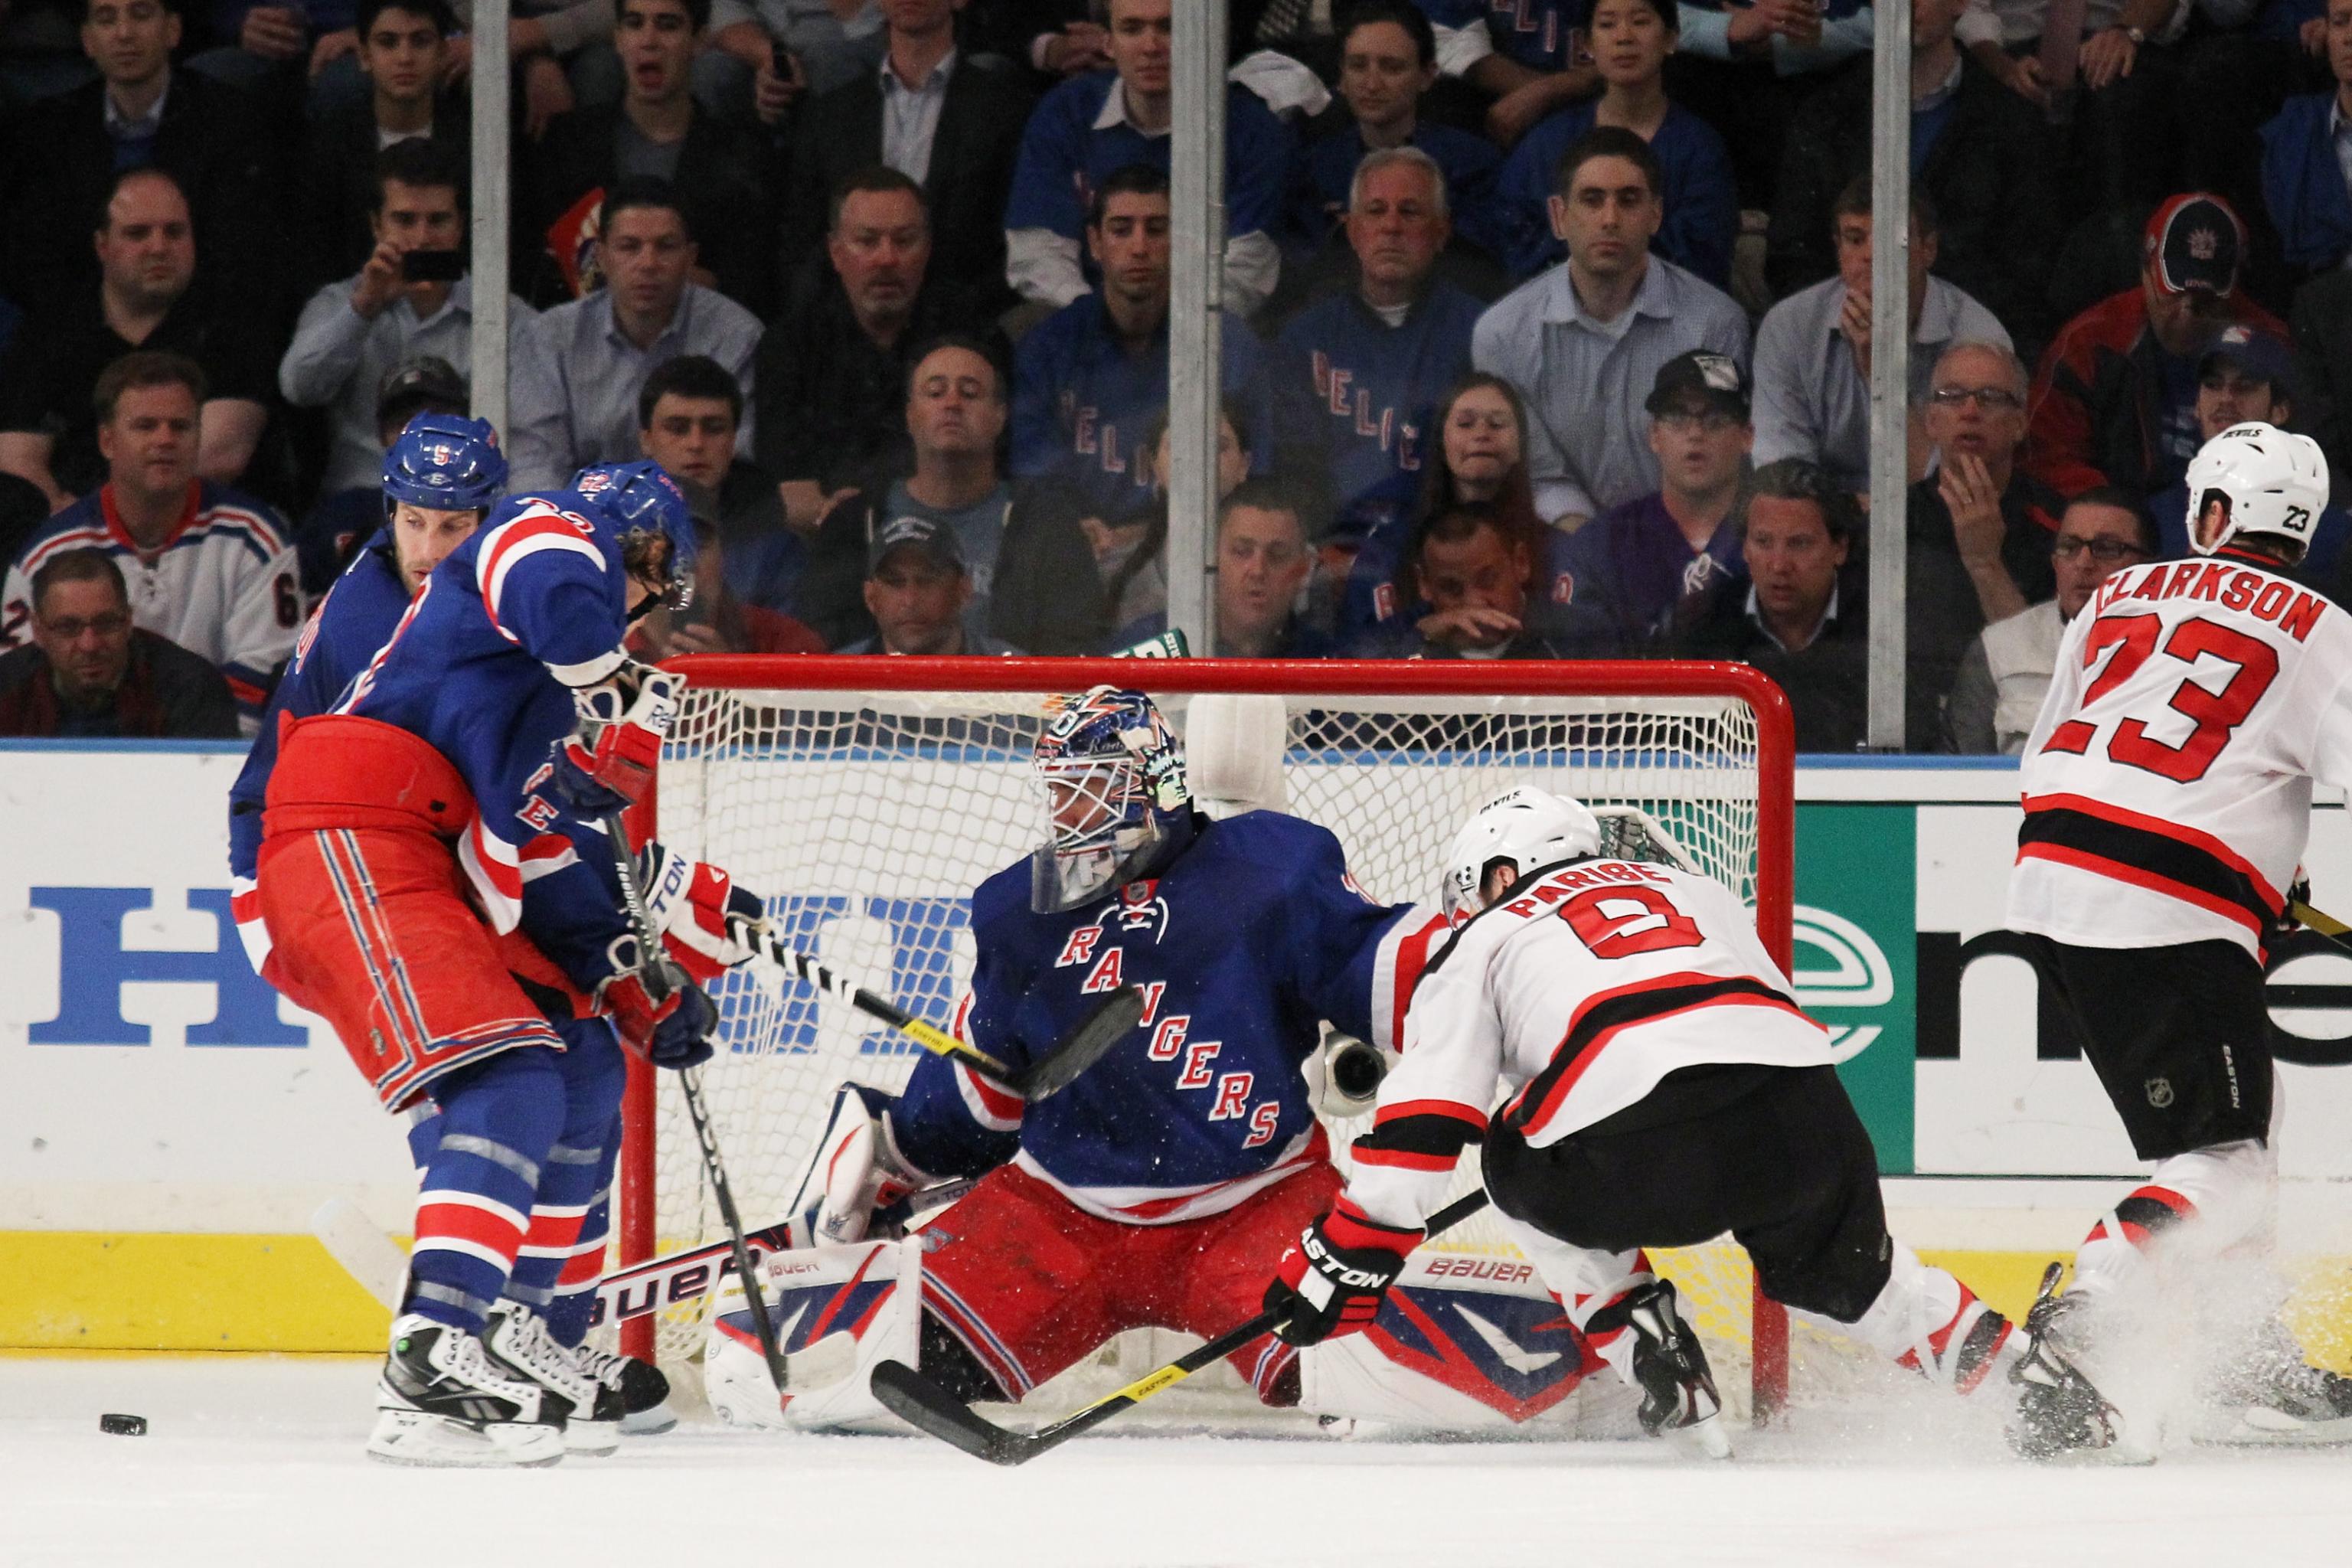 Devils vs. Rangers: A Rivalry Worthy of a Stadium Series Game